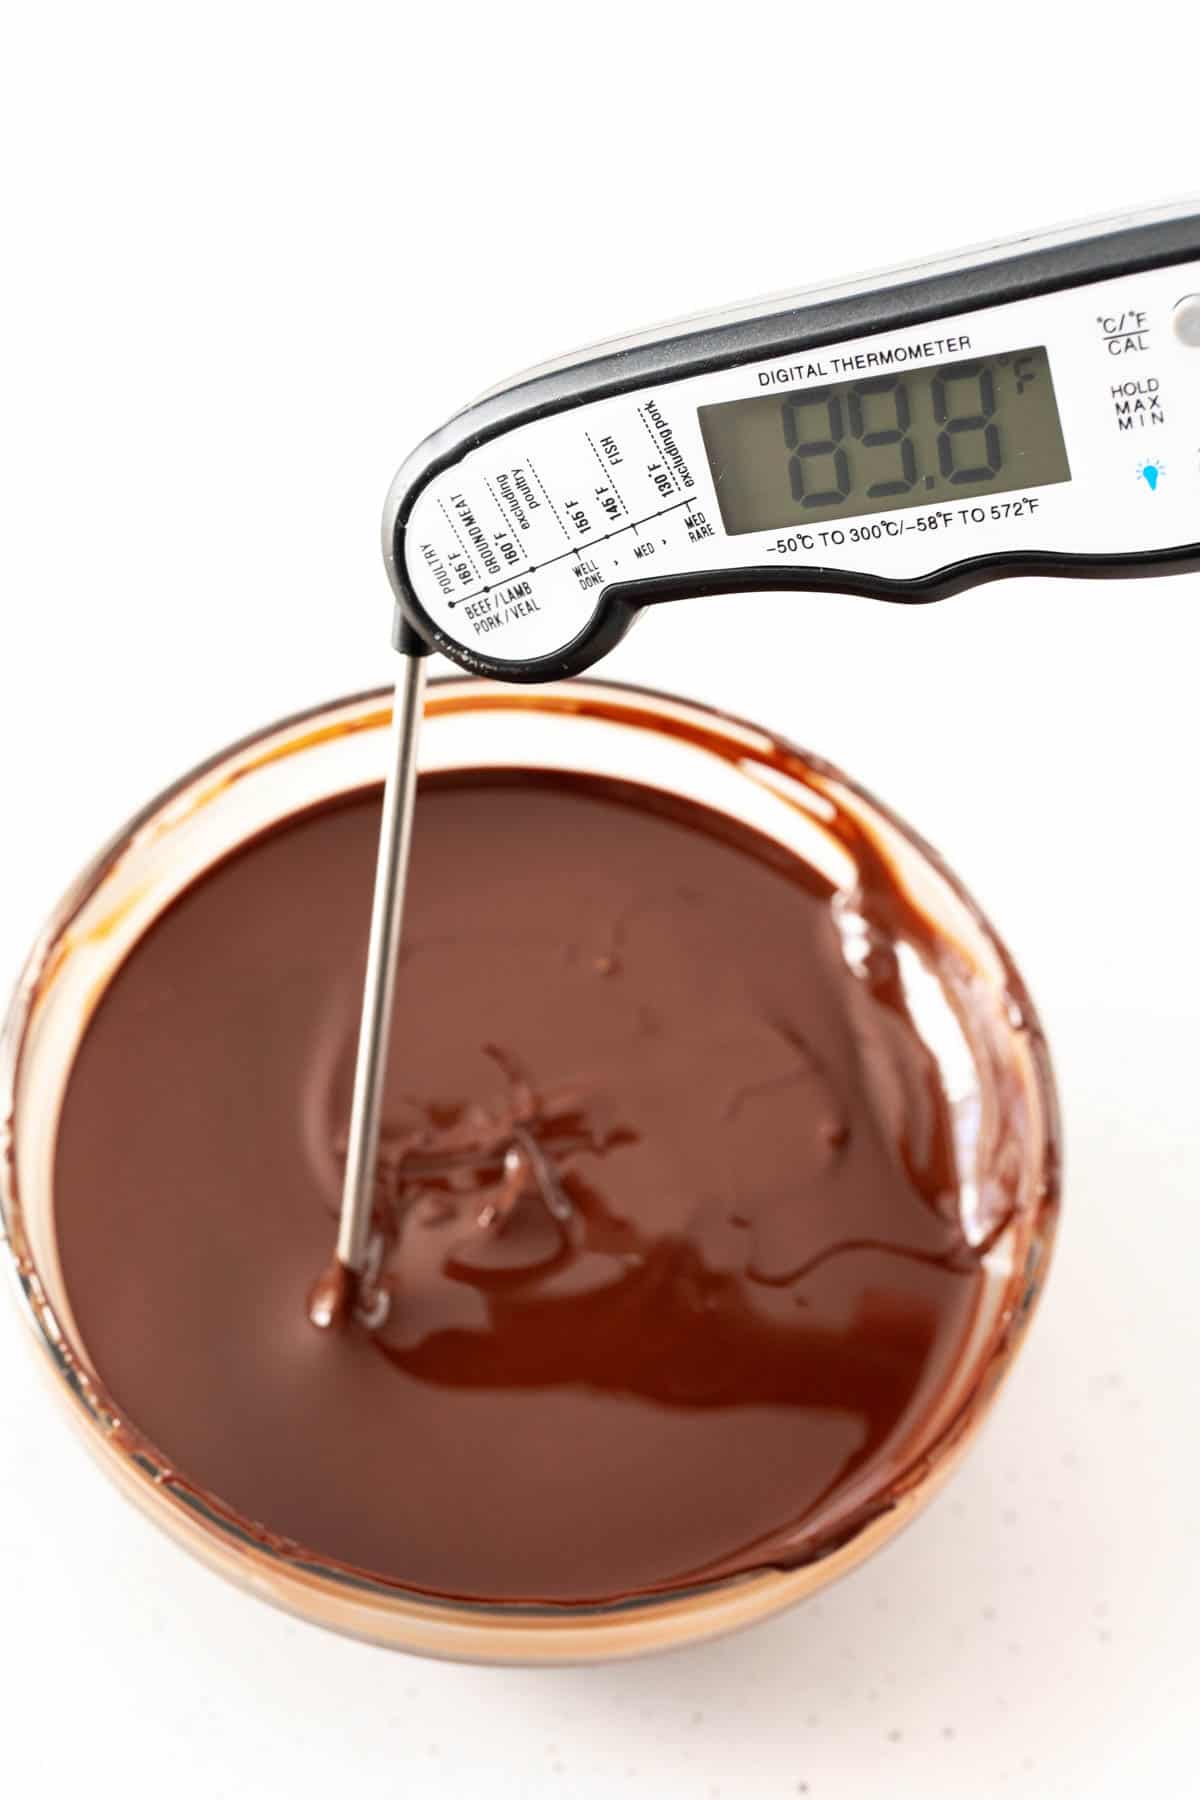 Melted chocolate in a glass bowl with a thermomter